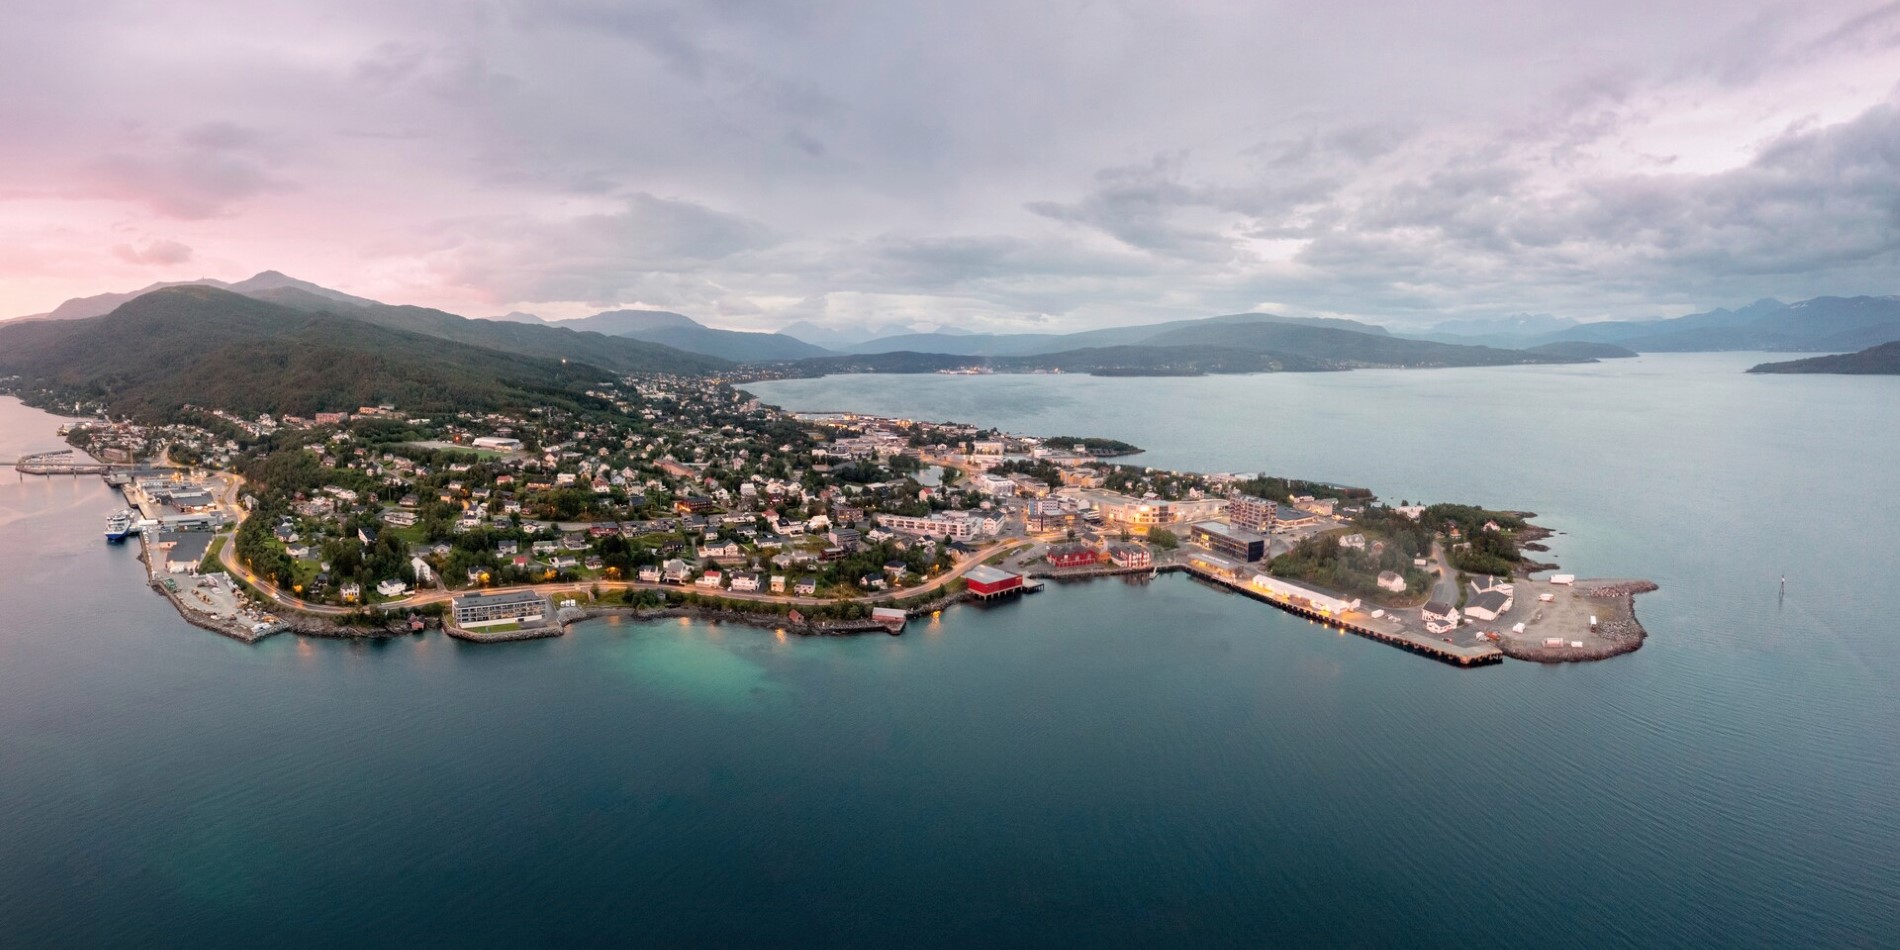 Aerial view of the port of Finnsnes in Norway